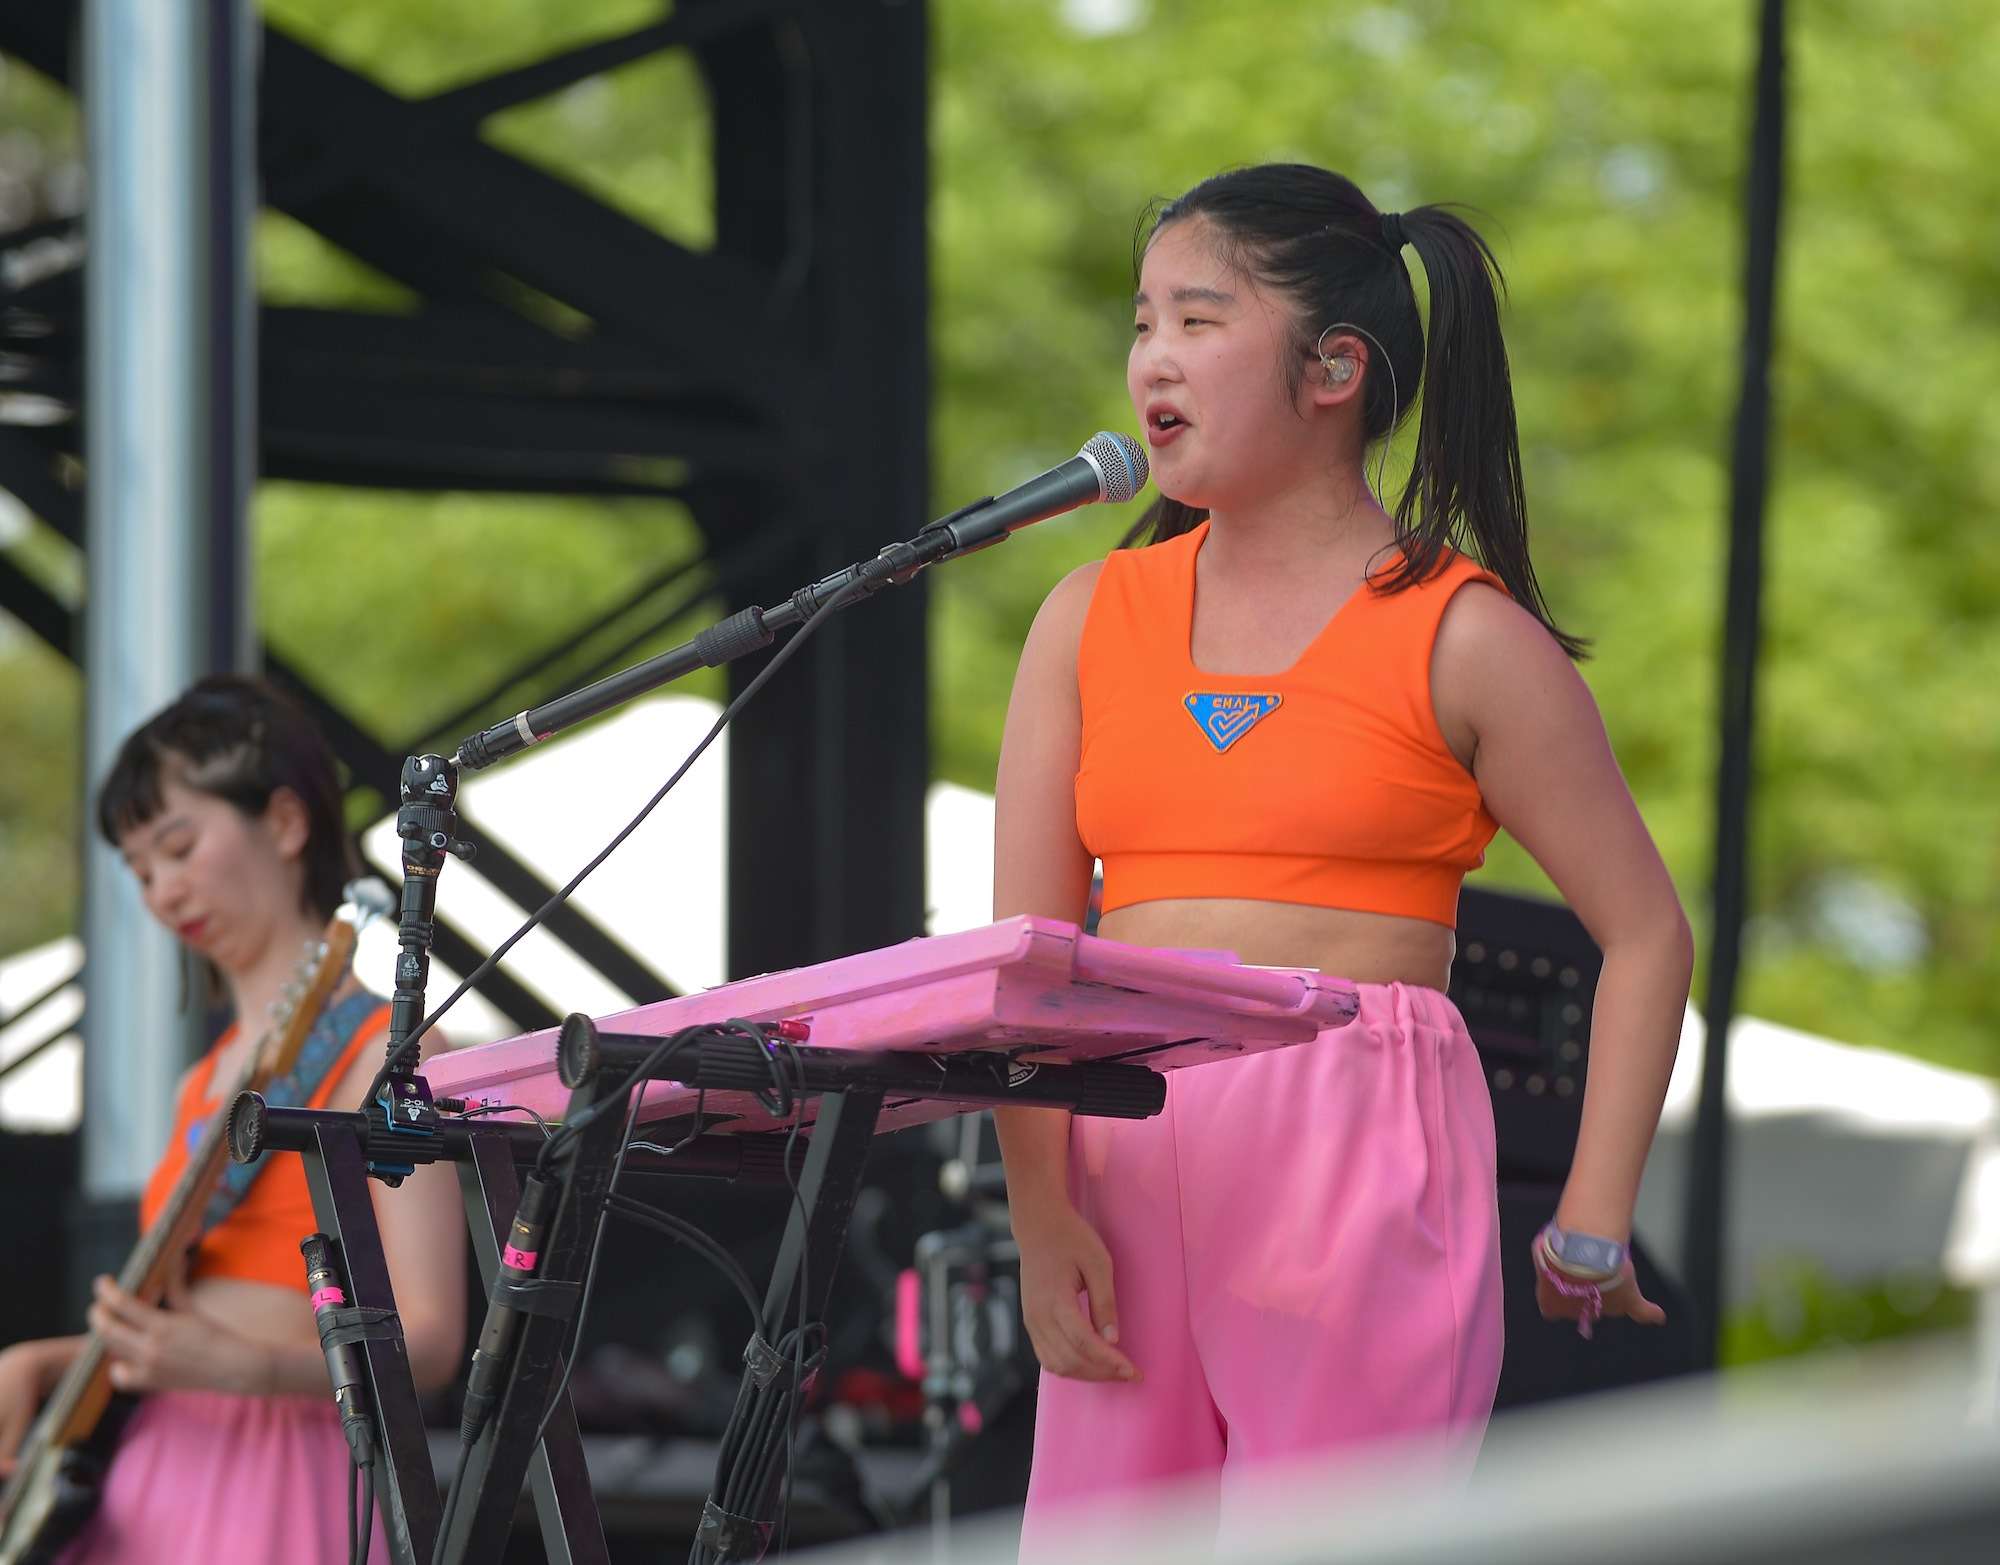 Chai Live at Pitchfork [GALLERY] 7